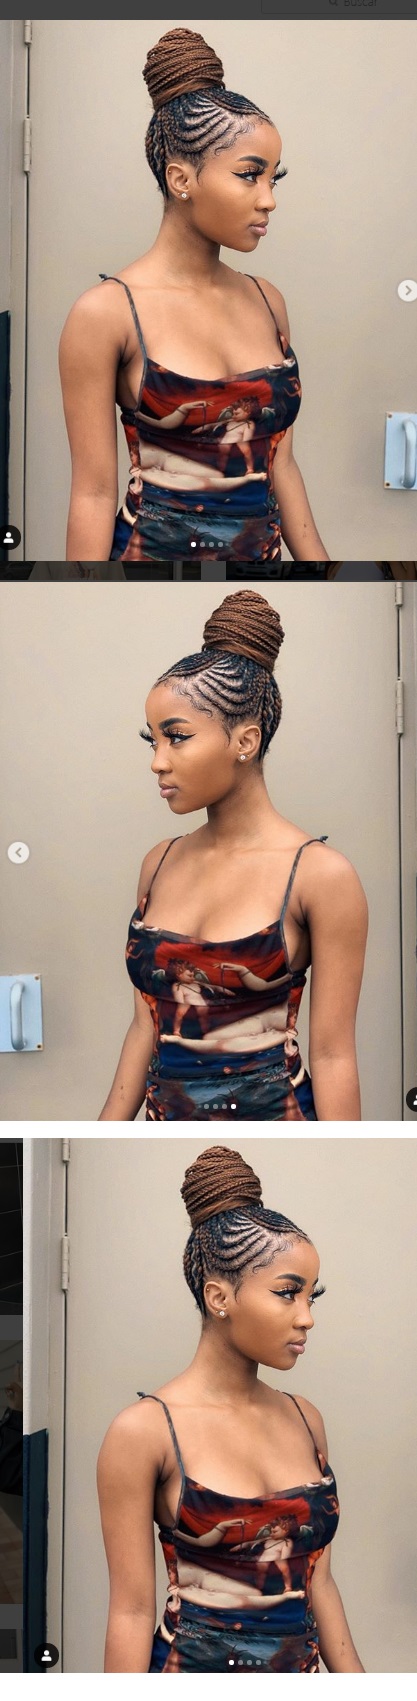 quick-braid-hairstyles-with-weave fake long eyelashes cute makeup black woman